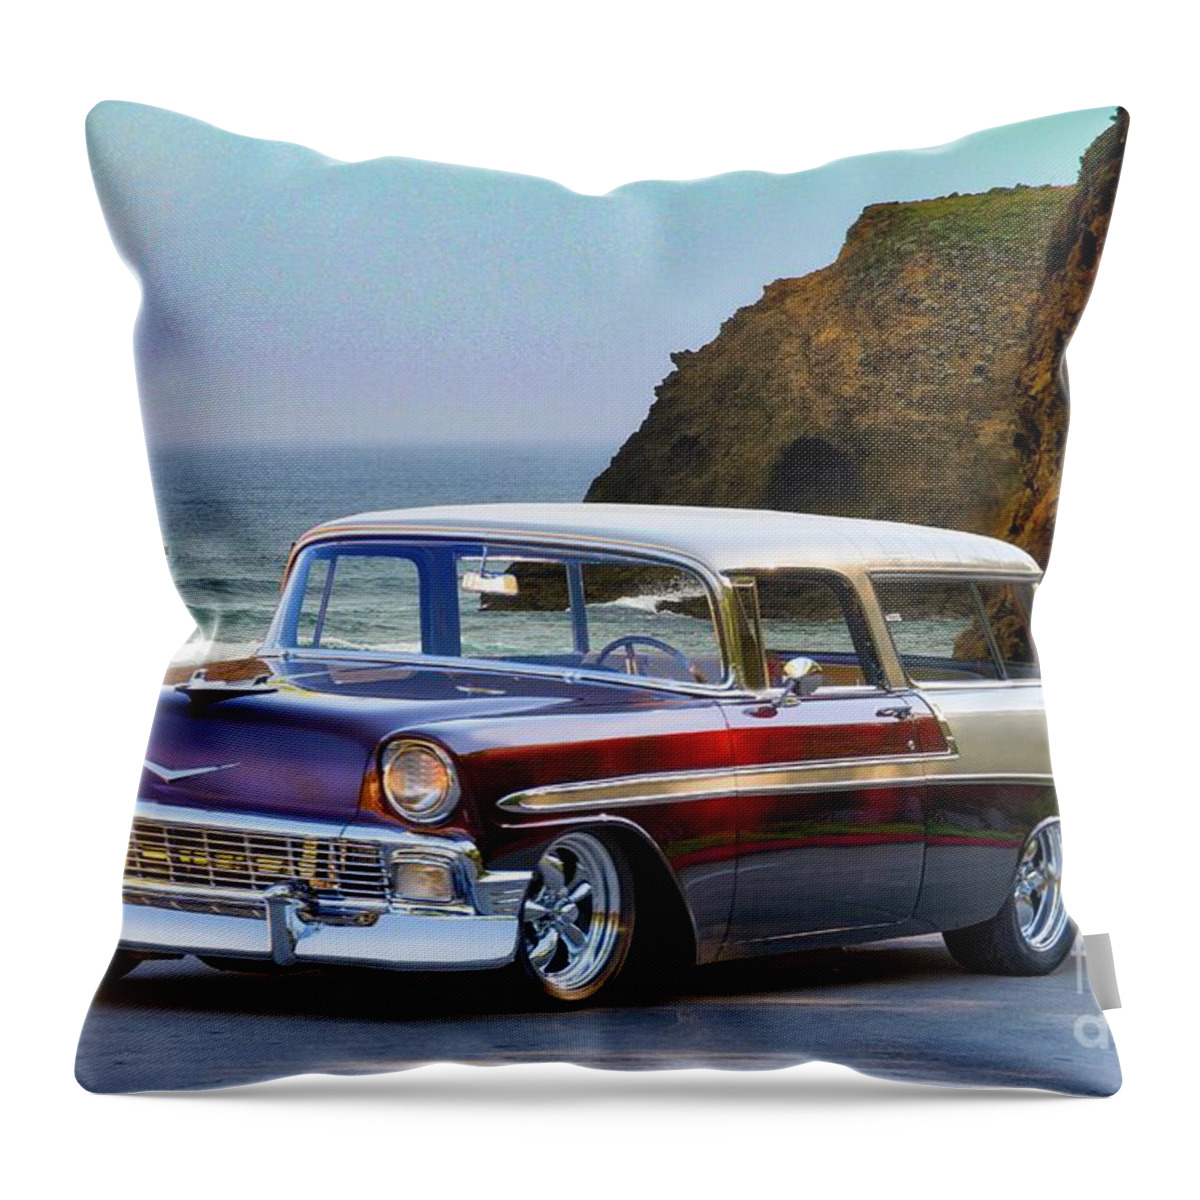 Auto Throw Pillow featuring the photograph 1956 Chevrolet Nomad Wagon by Dave Koontz